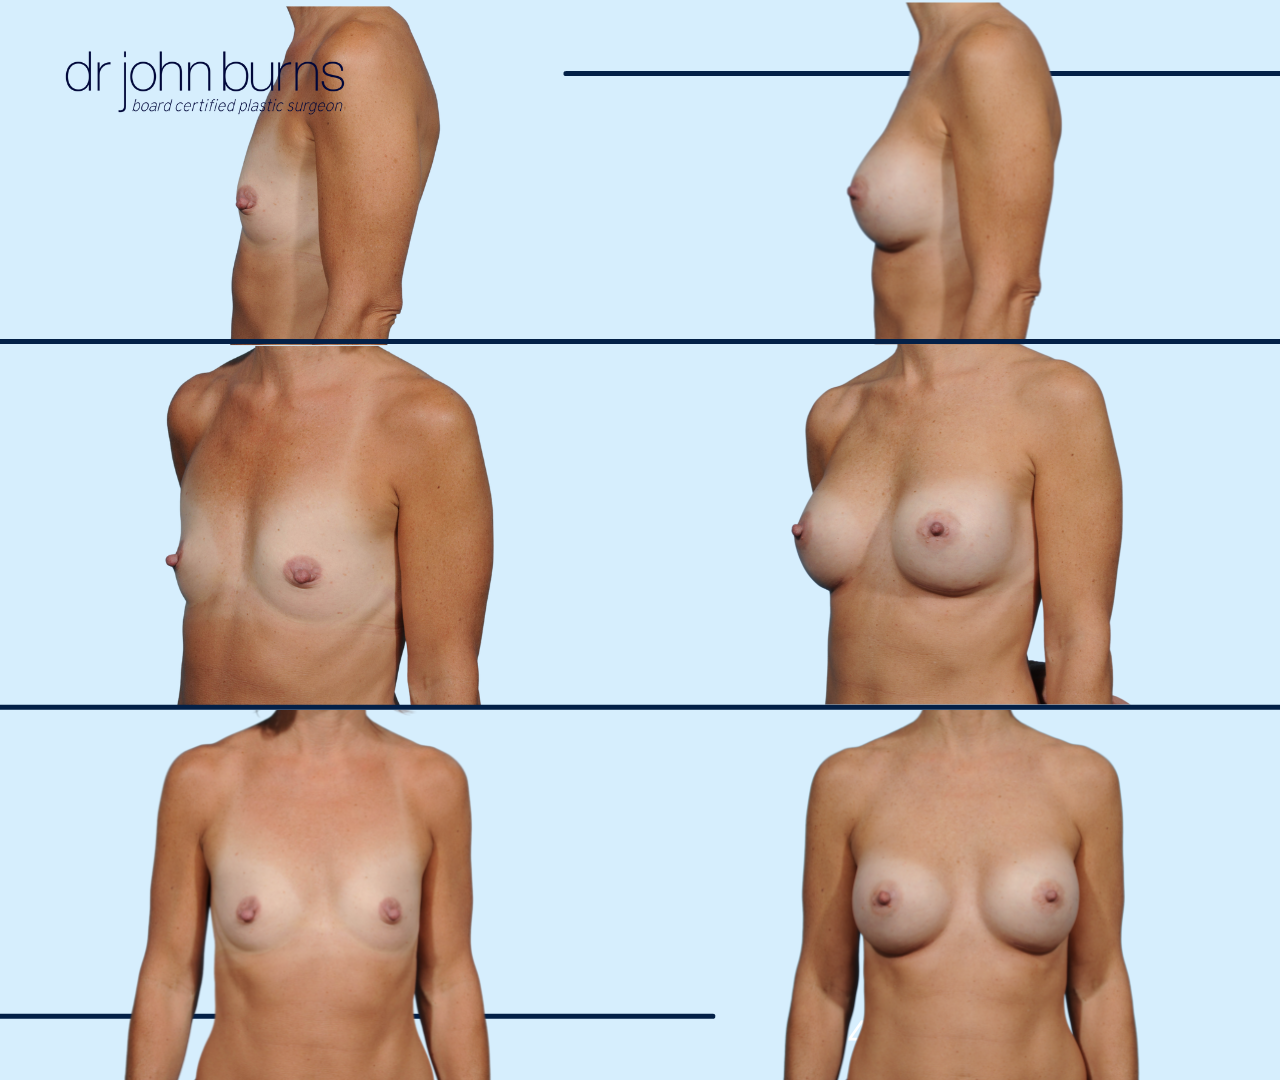 Before & After 330 cc Breast Implants by Dr. John Burns